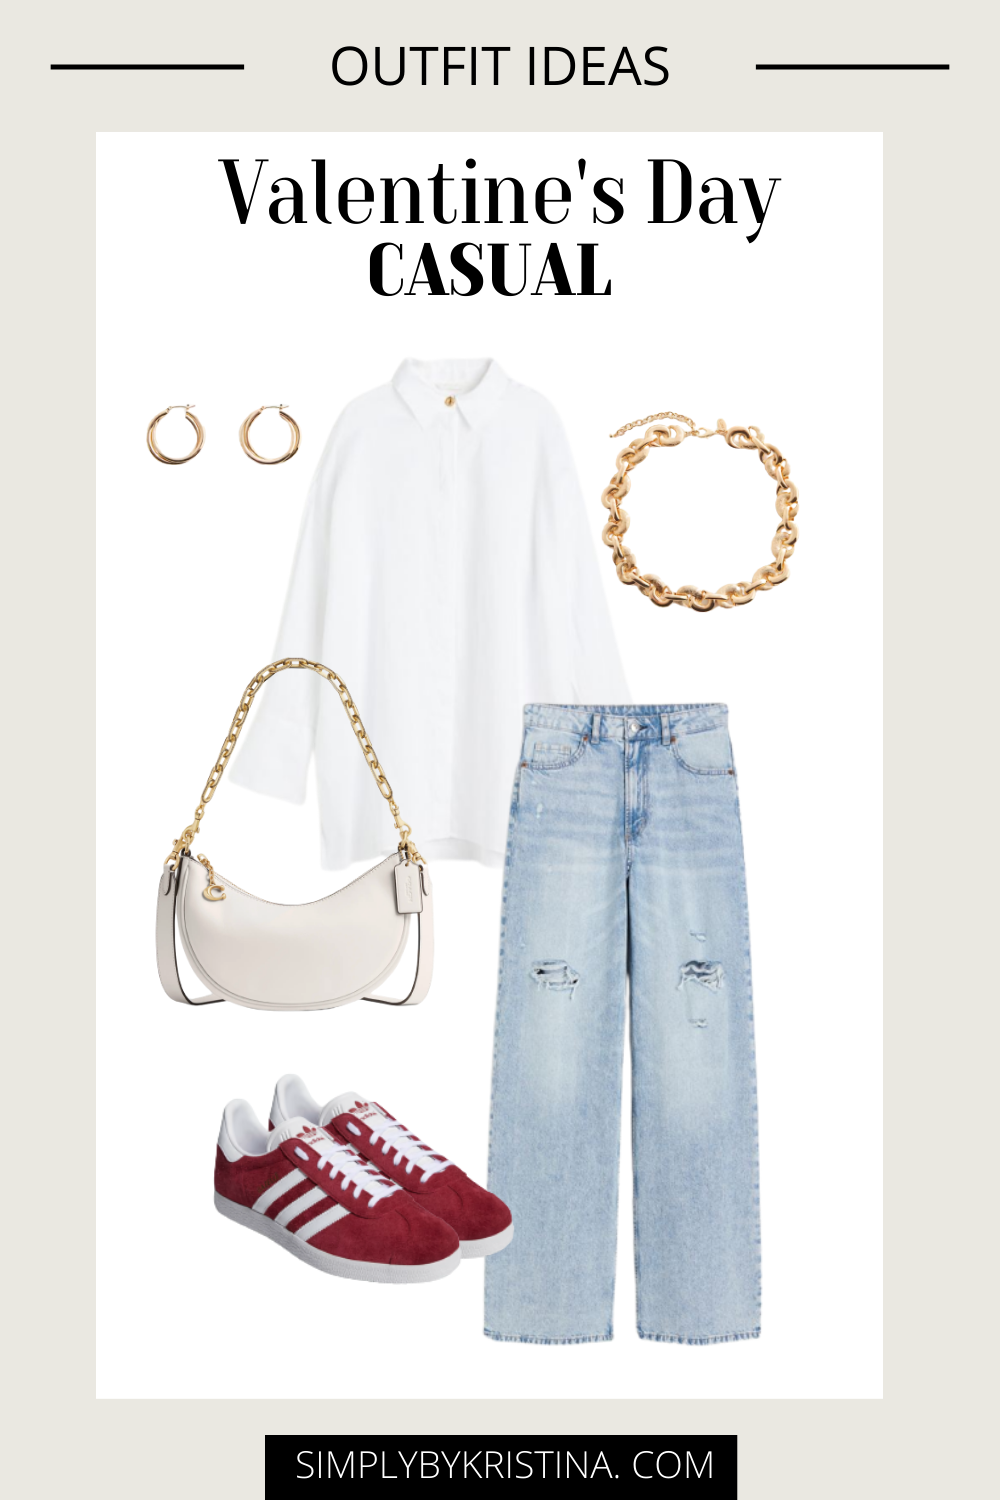 Chic Yet Casual Valentine's Day Outfit Ideas